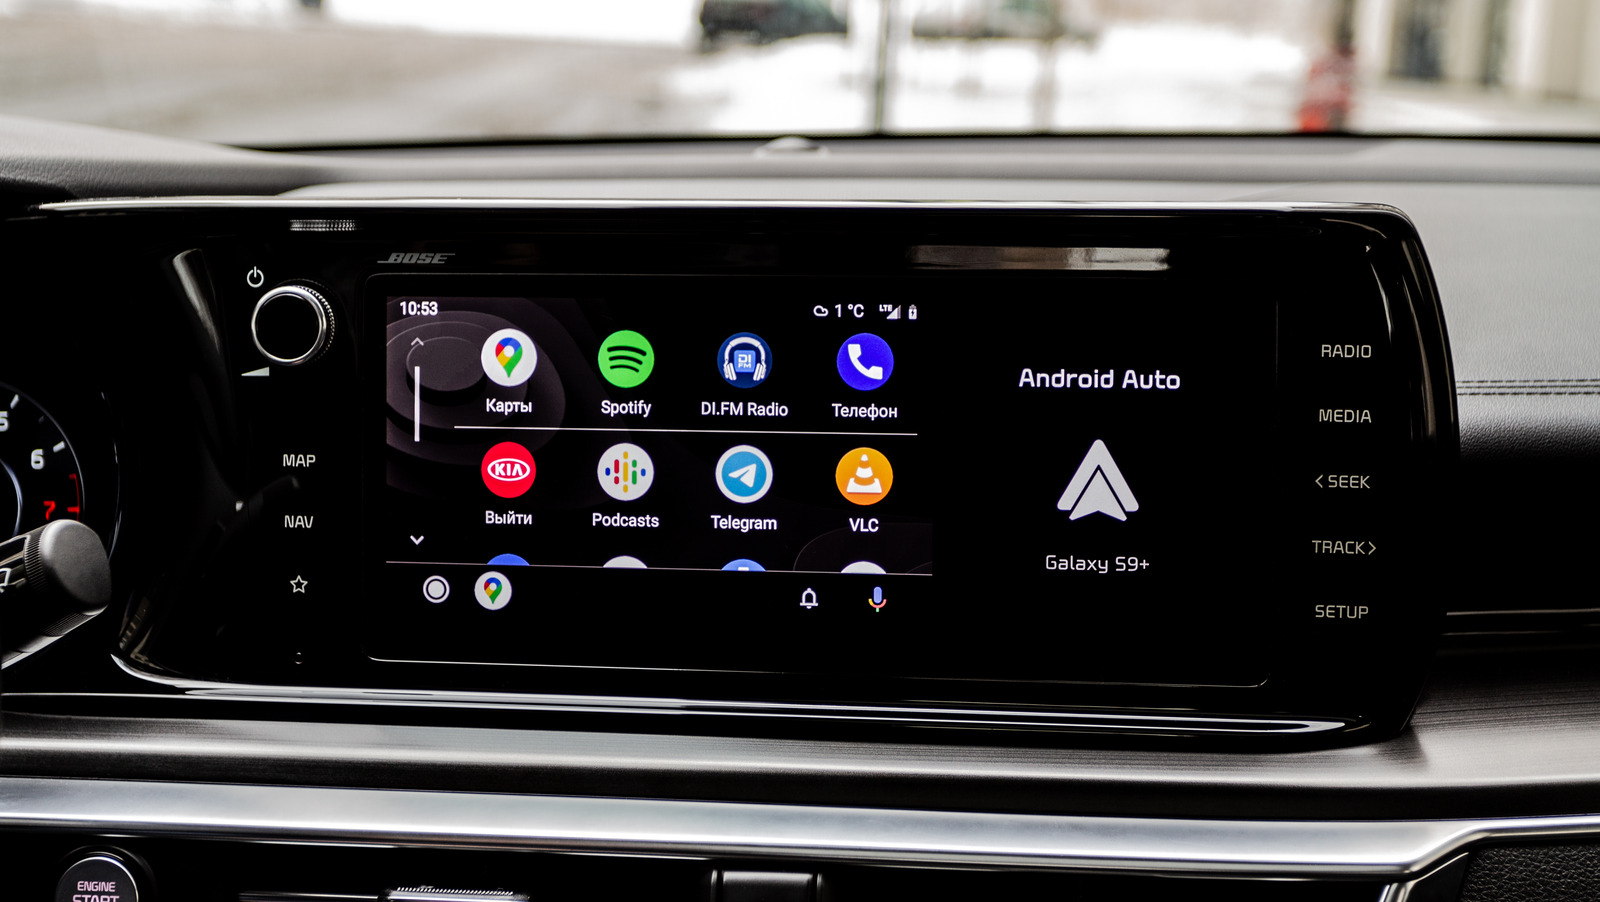 These New Android Auto Apps Could Help Make Your Commute More Productive – SlashGear